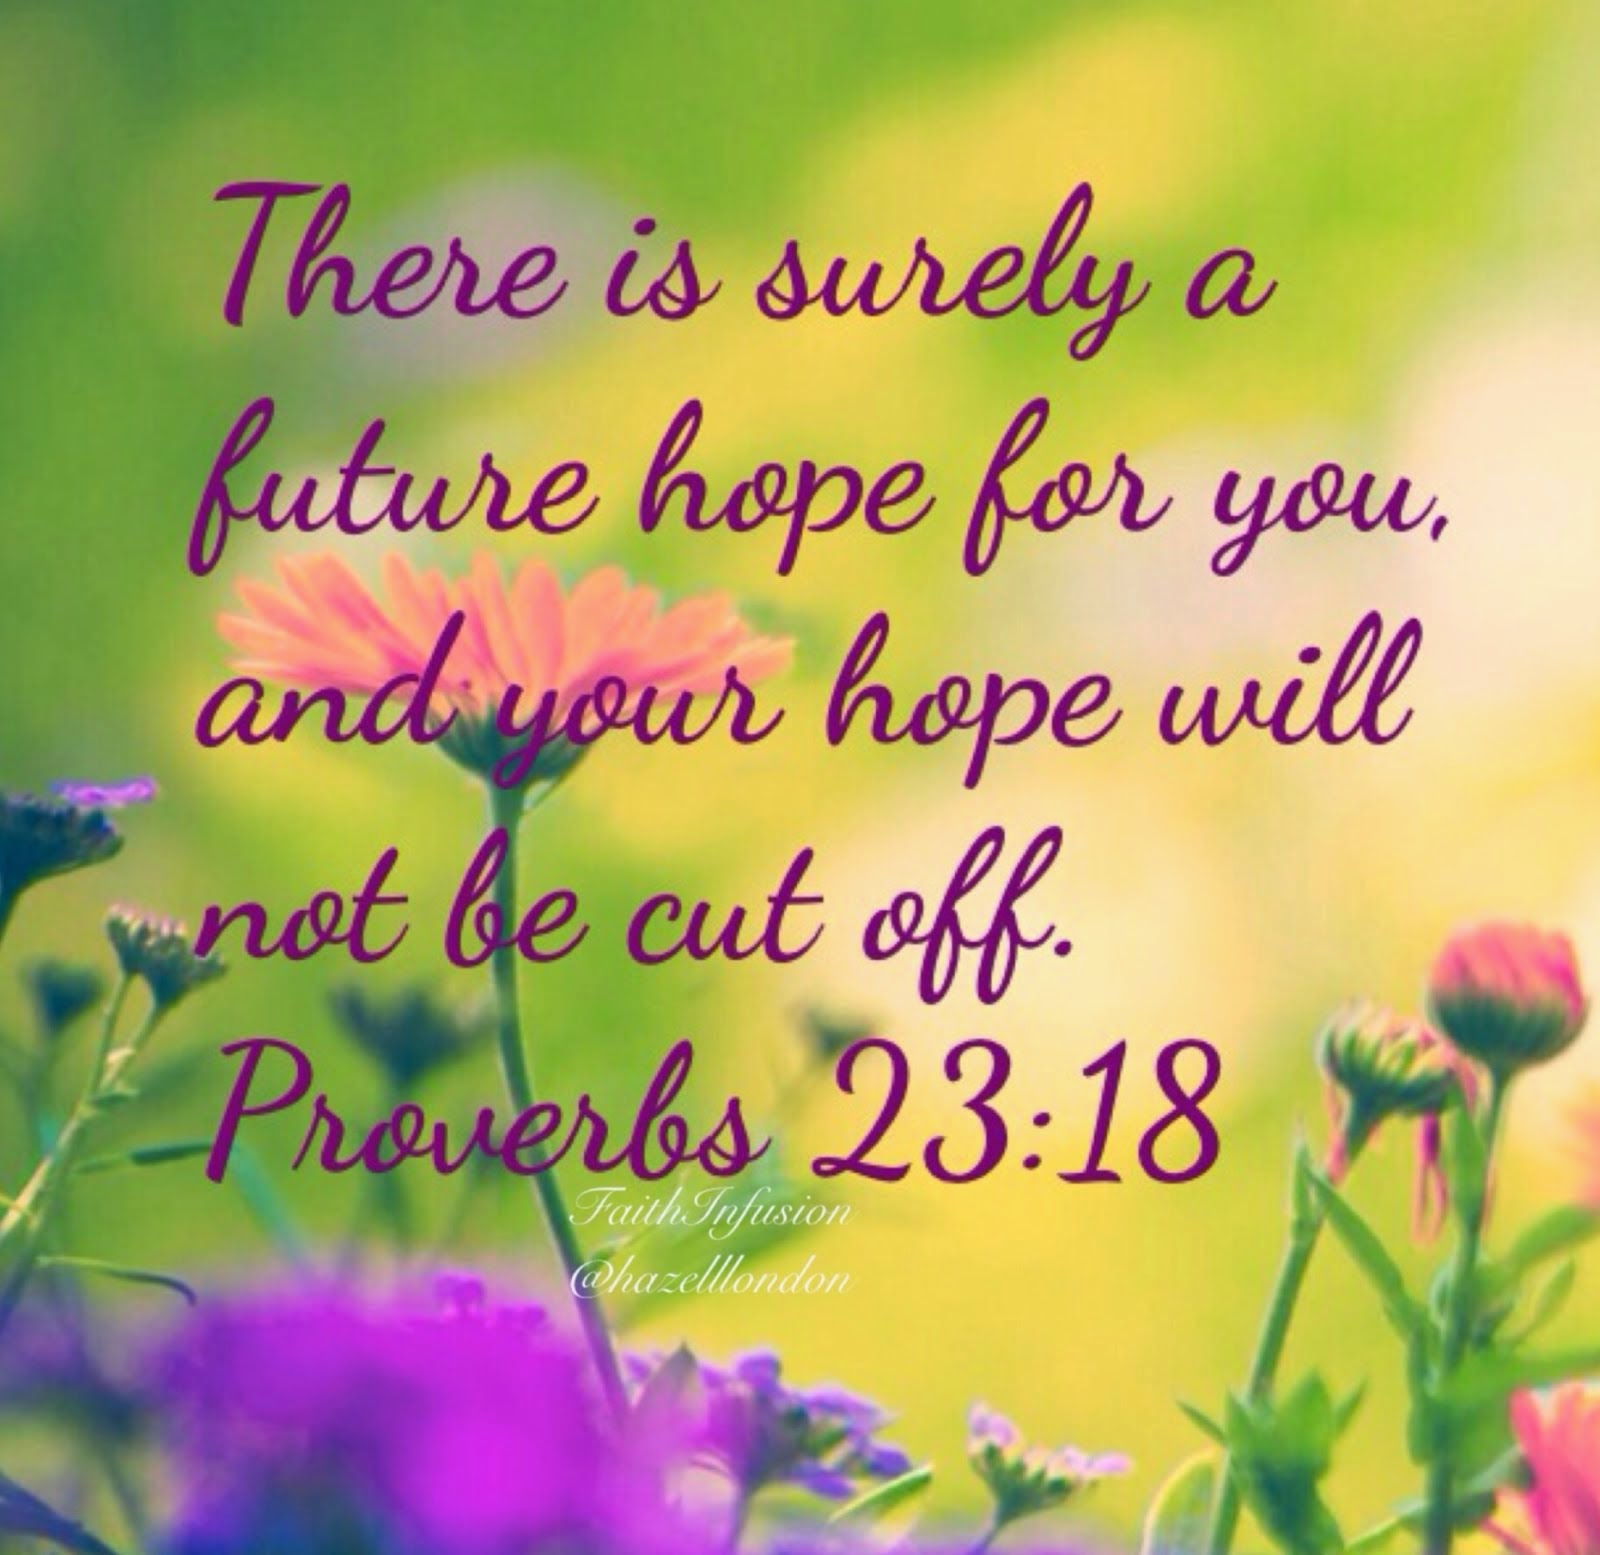 You have a hope! You have a future